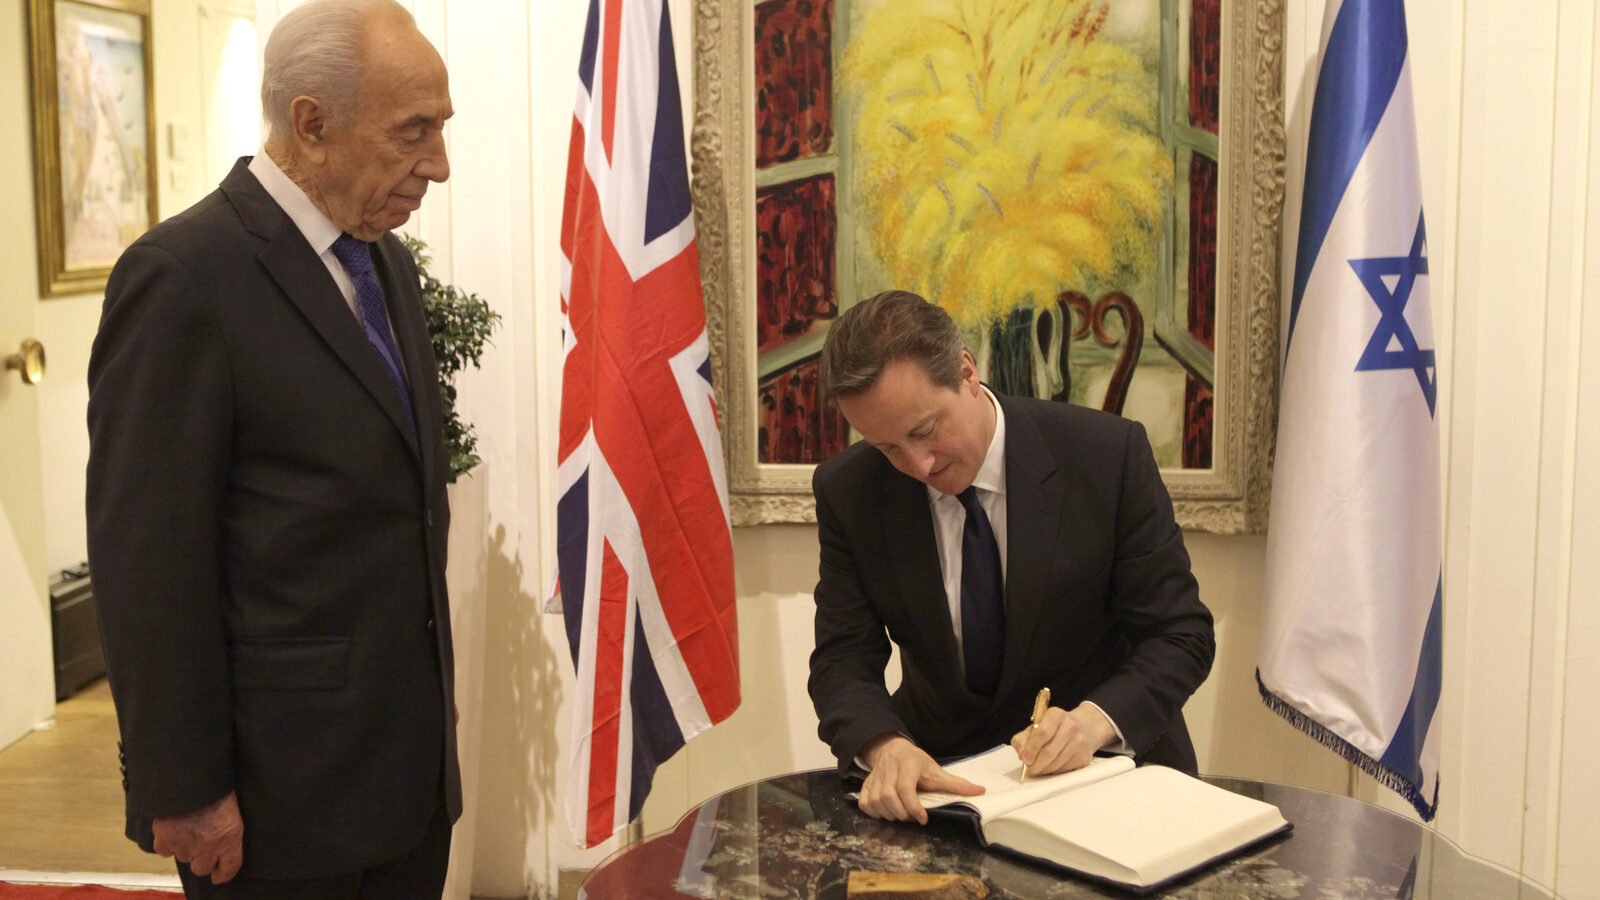 Former Israeli President Shimon Peres watches as British Prime Minister David Cameron signs a visitors book in Jerusalem Wednesday, March 12, 2014. Cameron was visiting Israel to vow support in rejecting boycott attempts against the Jewish state. (AP Photo/Dan Balilty)